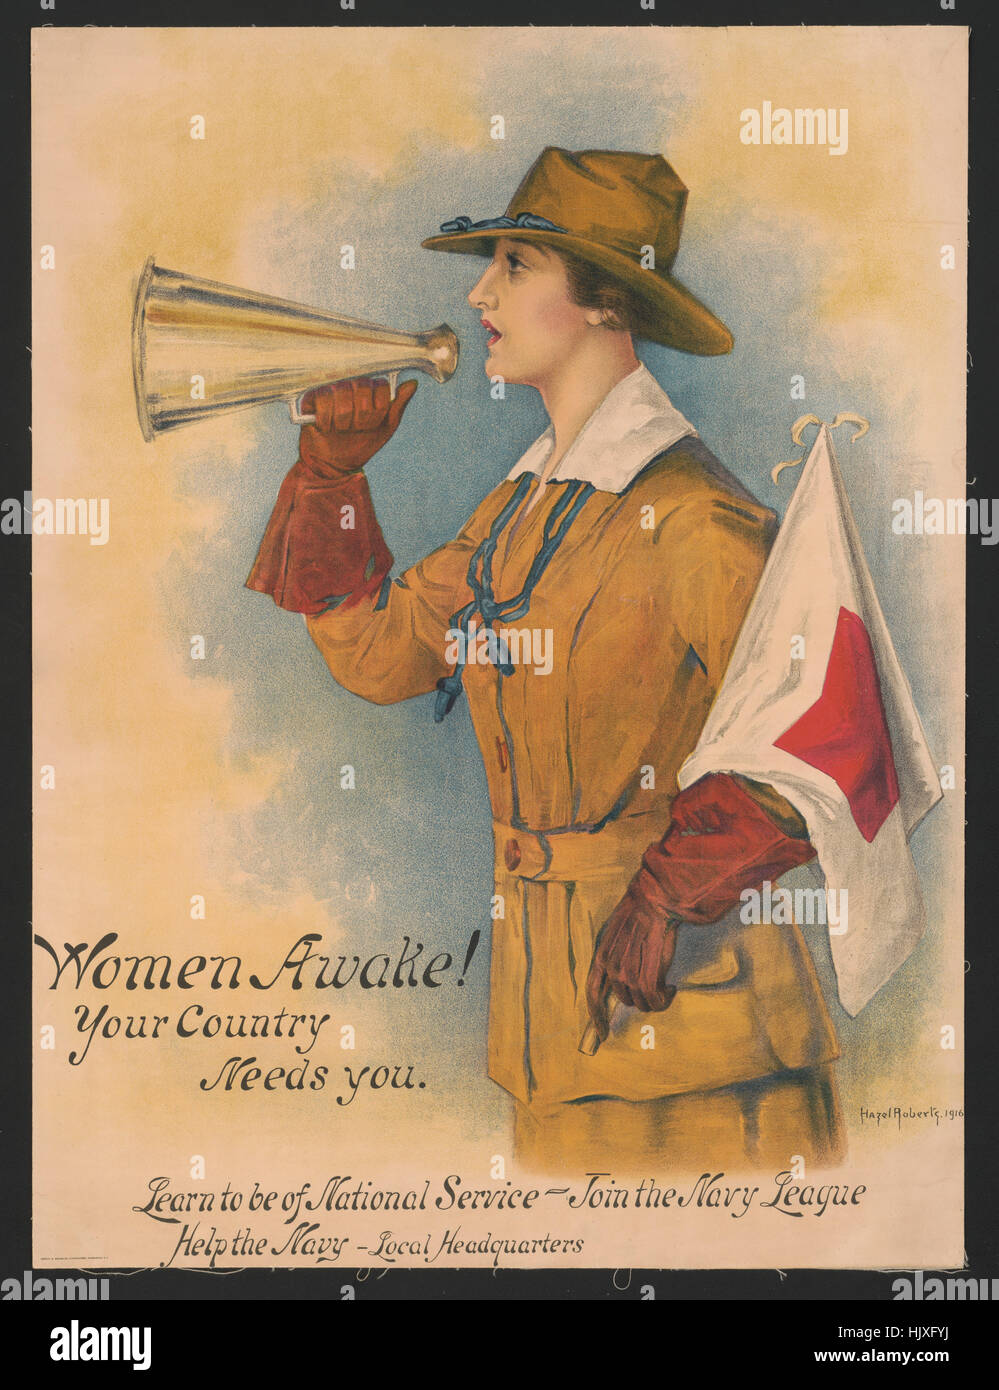 Woman in Uniform Holding Megaphone and Flag, 'Women Awake! Your Country Needs You, Learn to be of National Service - Join the Navy League', World War I Recruitment Poster, by Hazel Roberts, 1916 Stock Photo